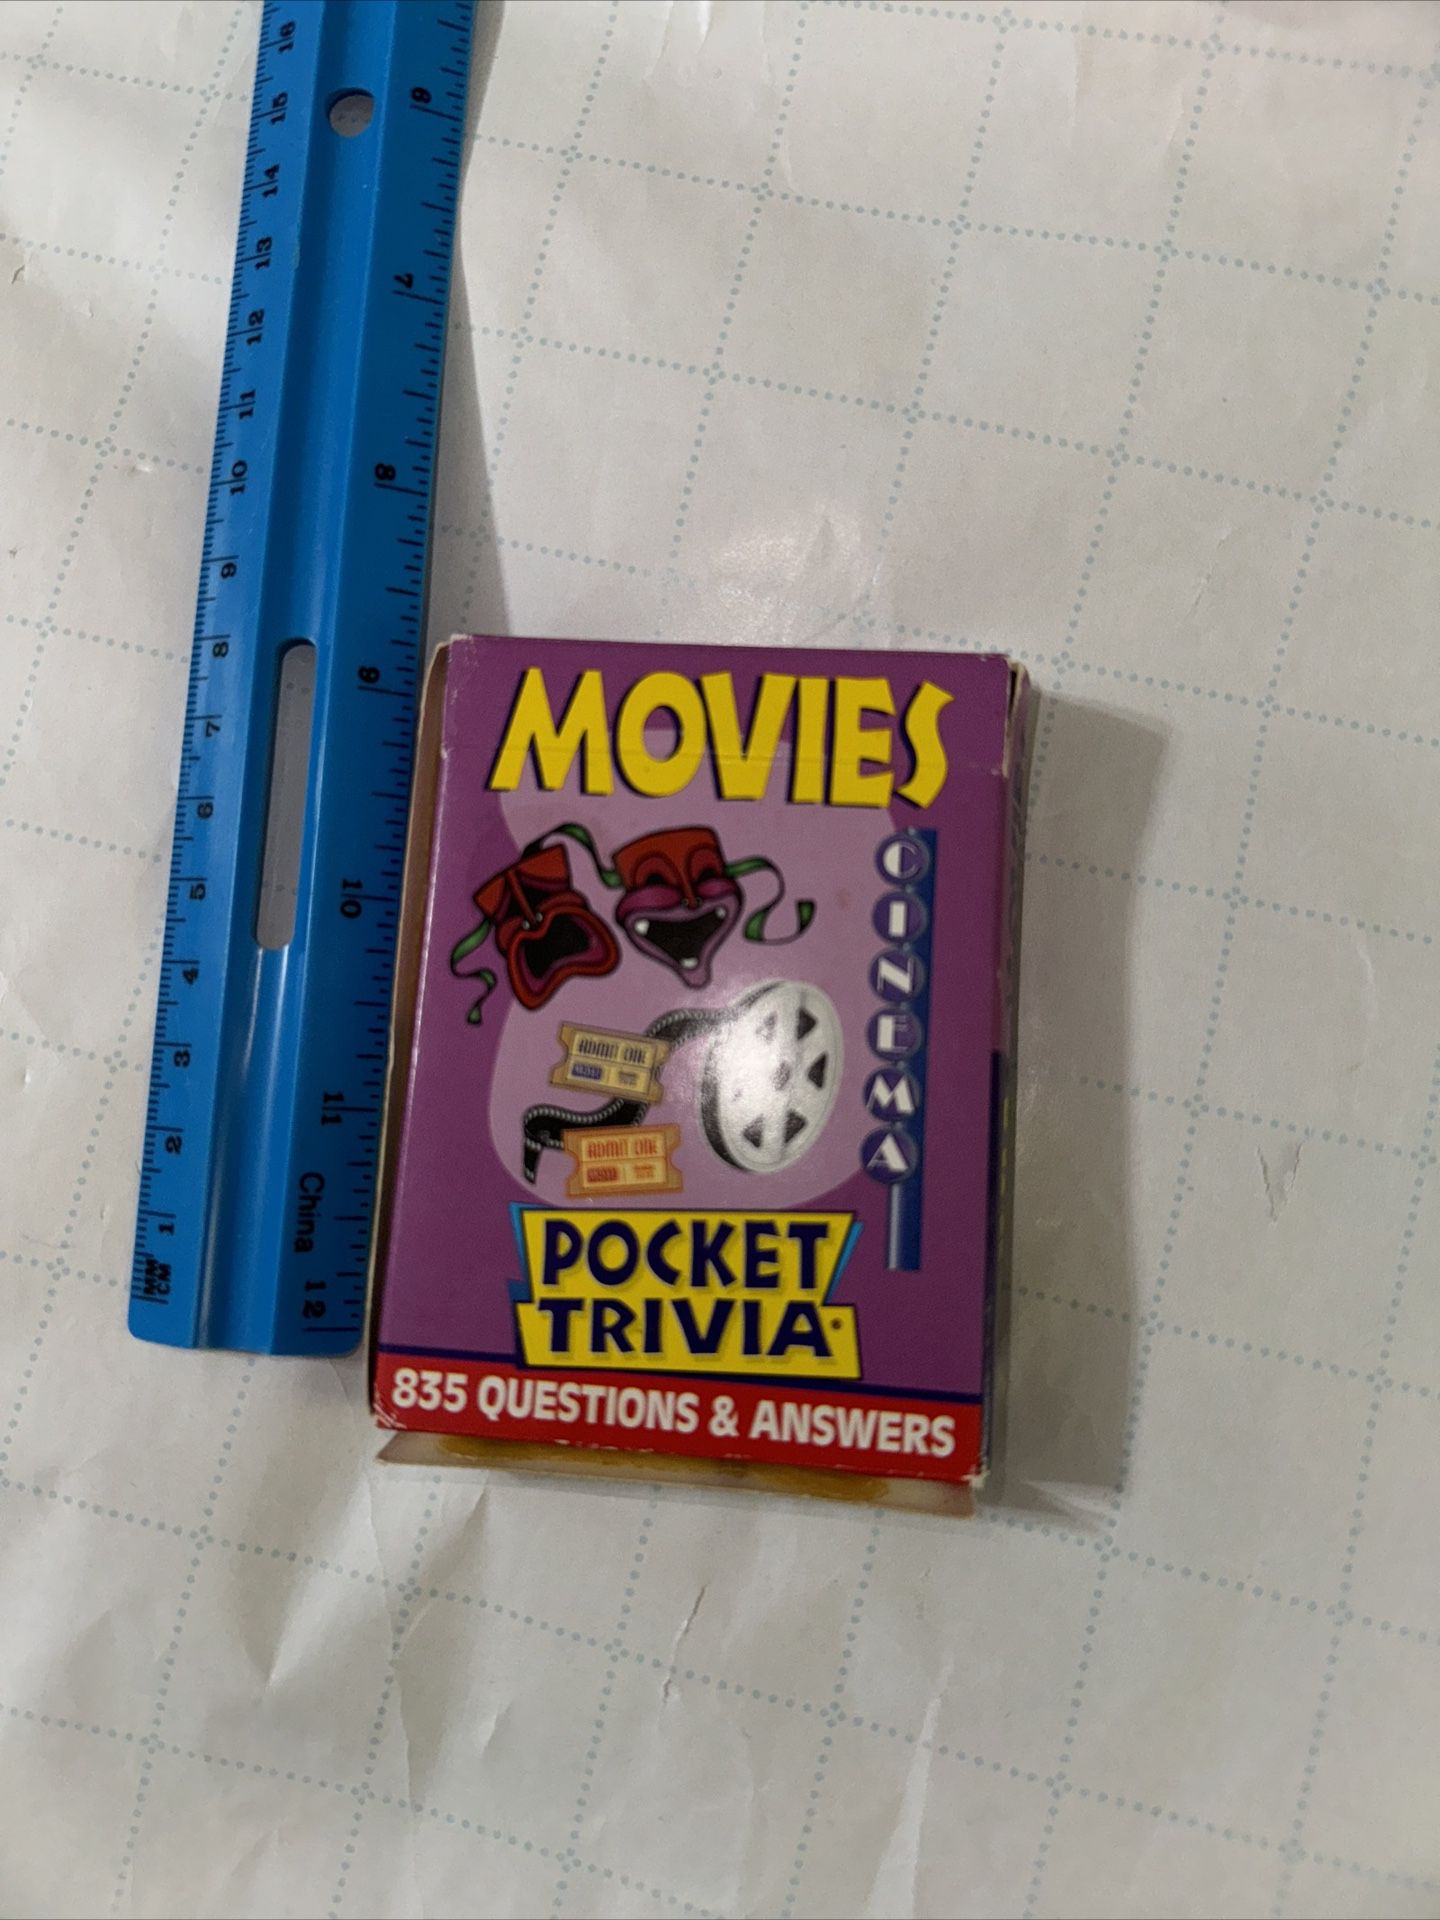 Movie Pocket Trivia Game, Fun for Everyone, Nice for Traveling, Vacations, Game Night, Fun Way to Connect With Your Kids and Family, Travel